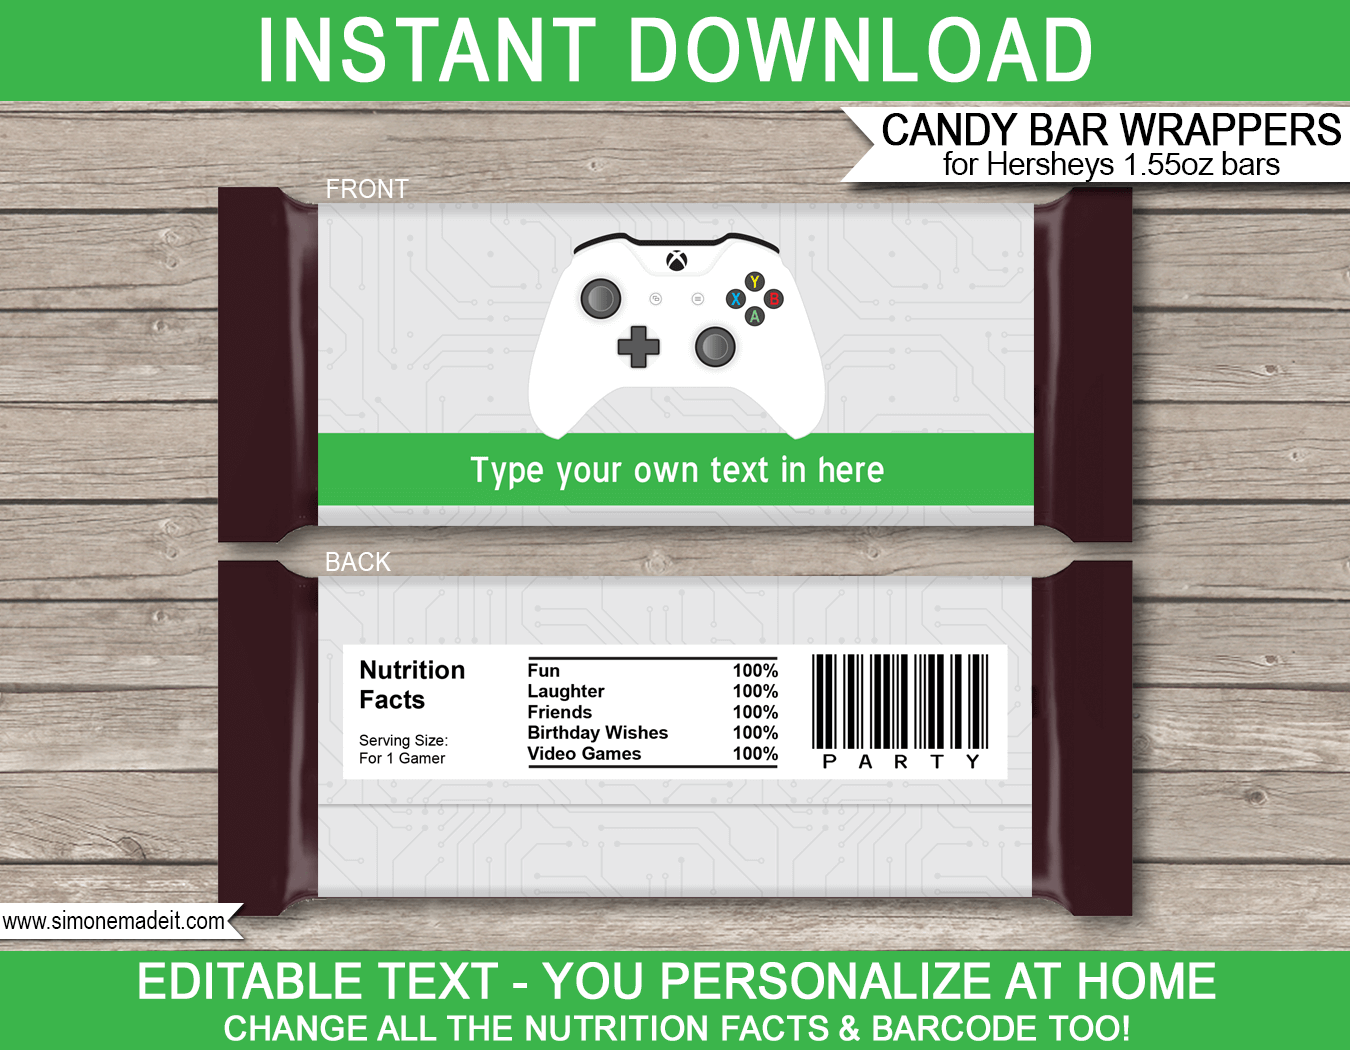 Printable Xbox Party Candy Bar Wrappers | Birthday Party Favors | Personalized Hershey Candy Bars | Editable Template | INSTANT DOWNLOAD $3.00 via simonemadeit.com